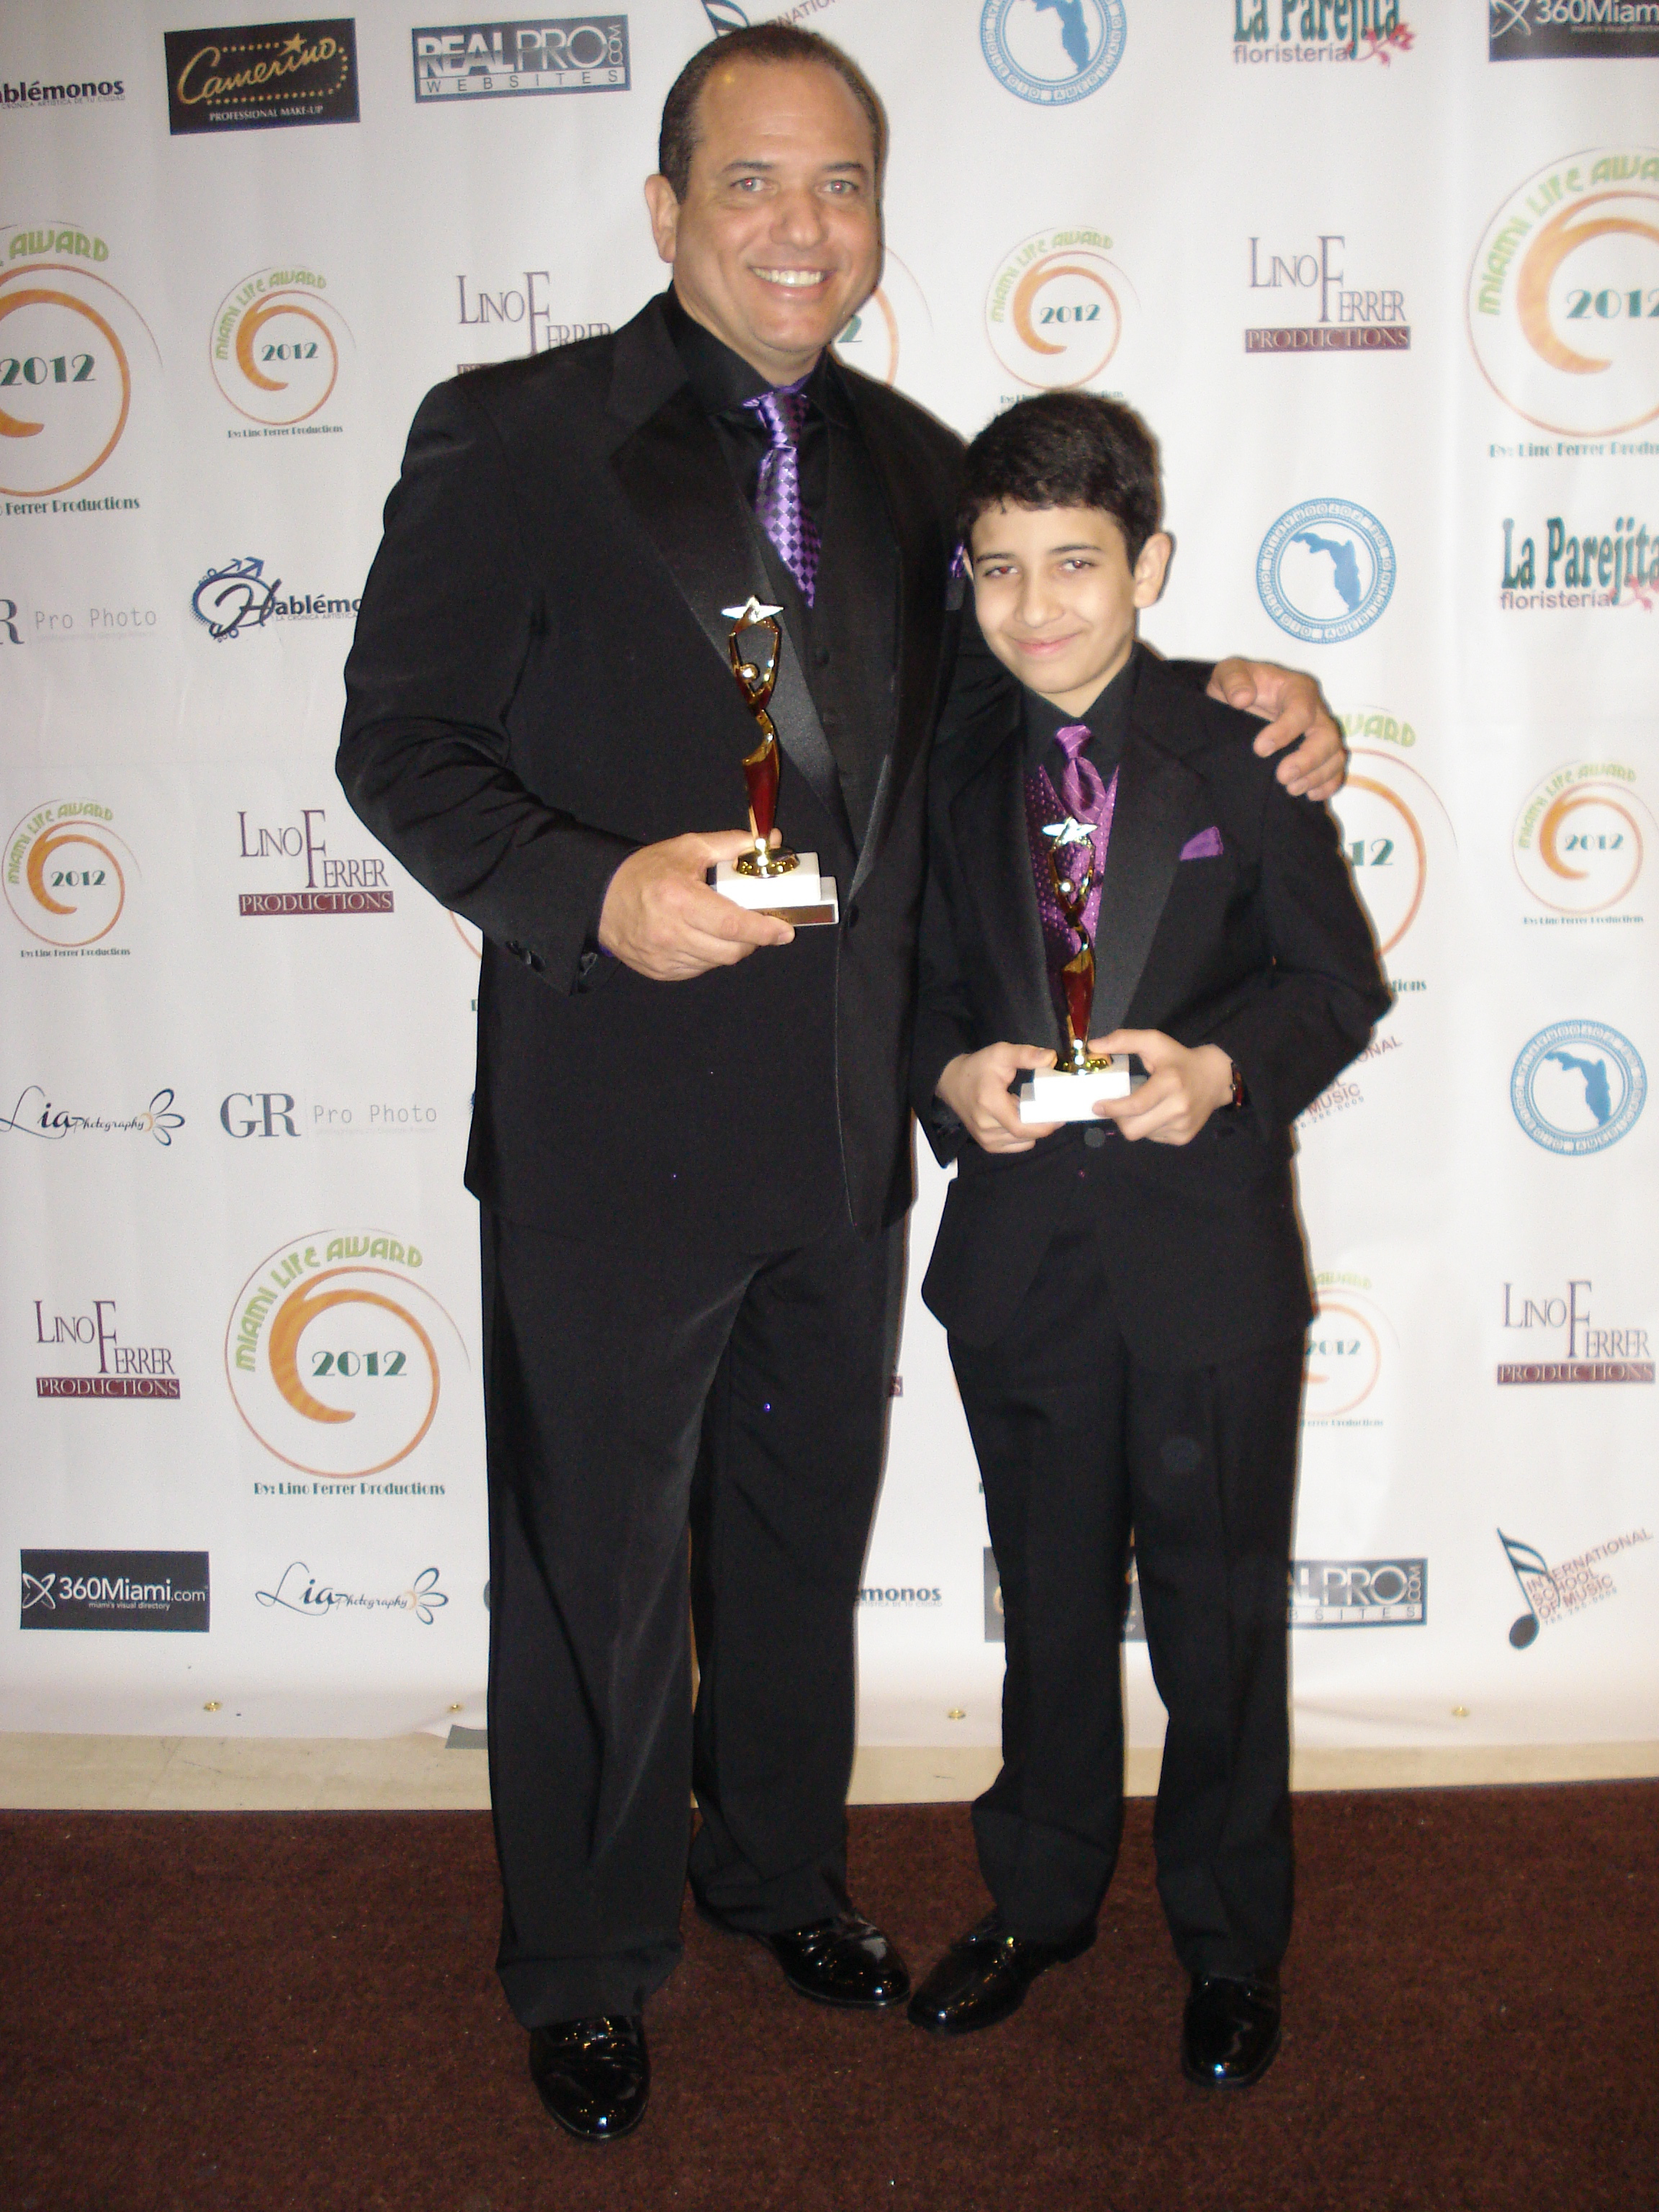 Awarded Best Actor (Sr.), & Future Star (Jr.) at the 2012 Miami Life Awards.